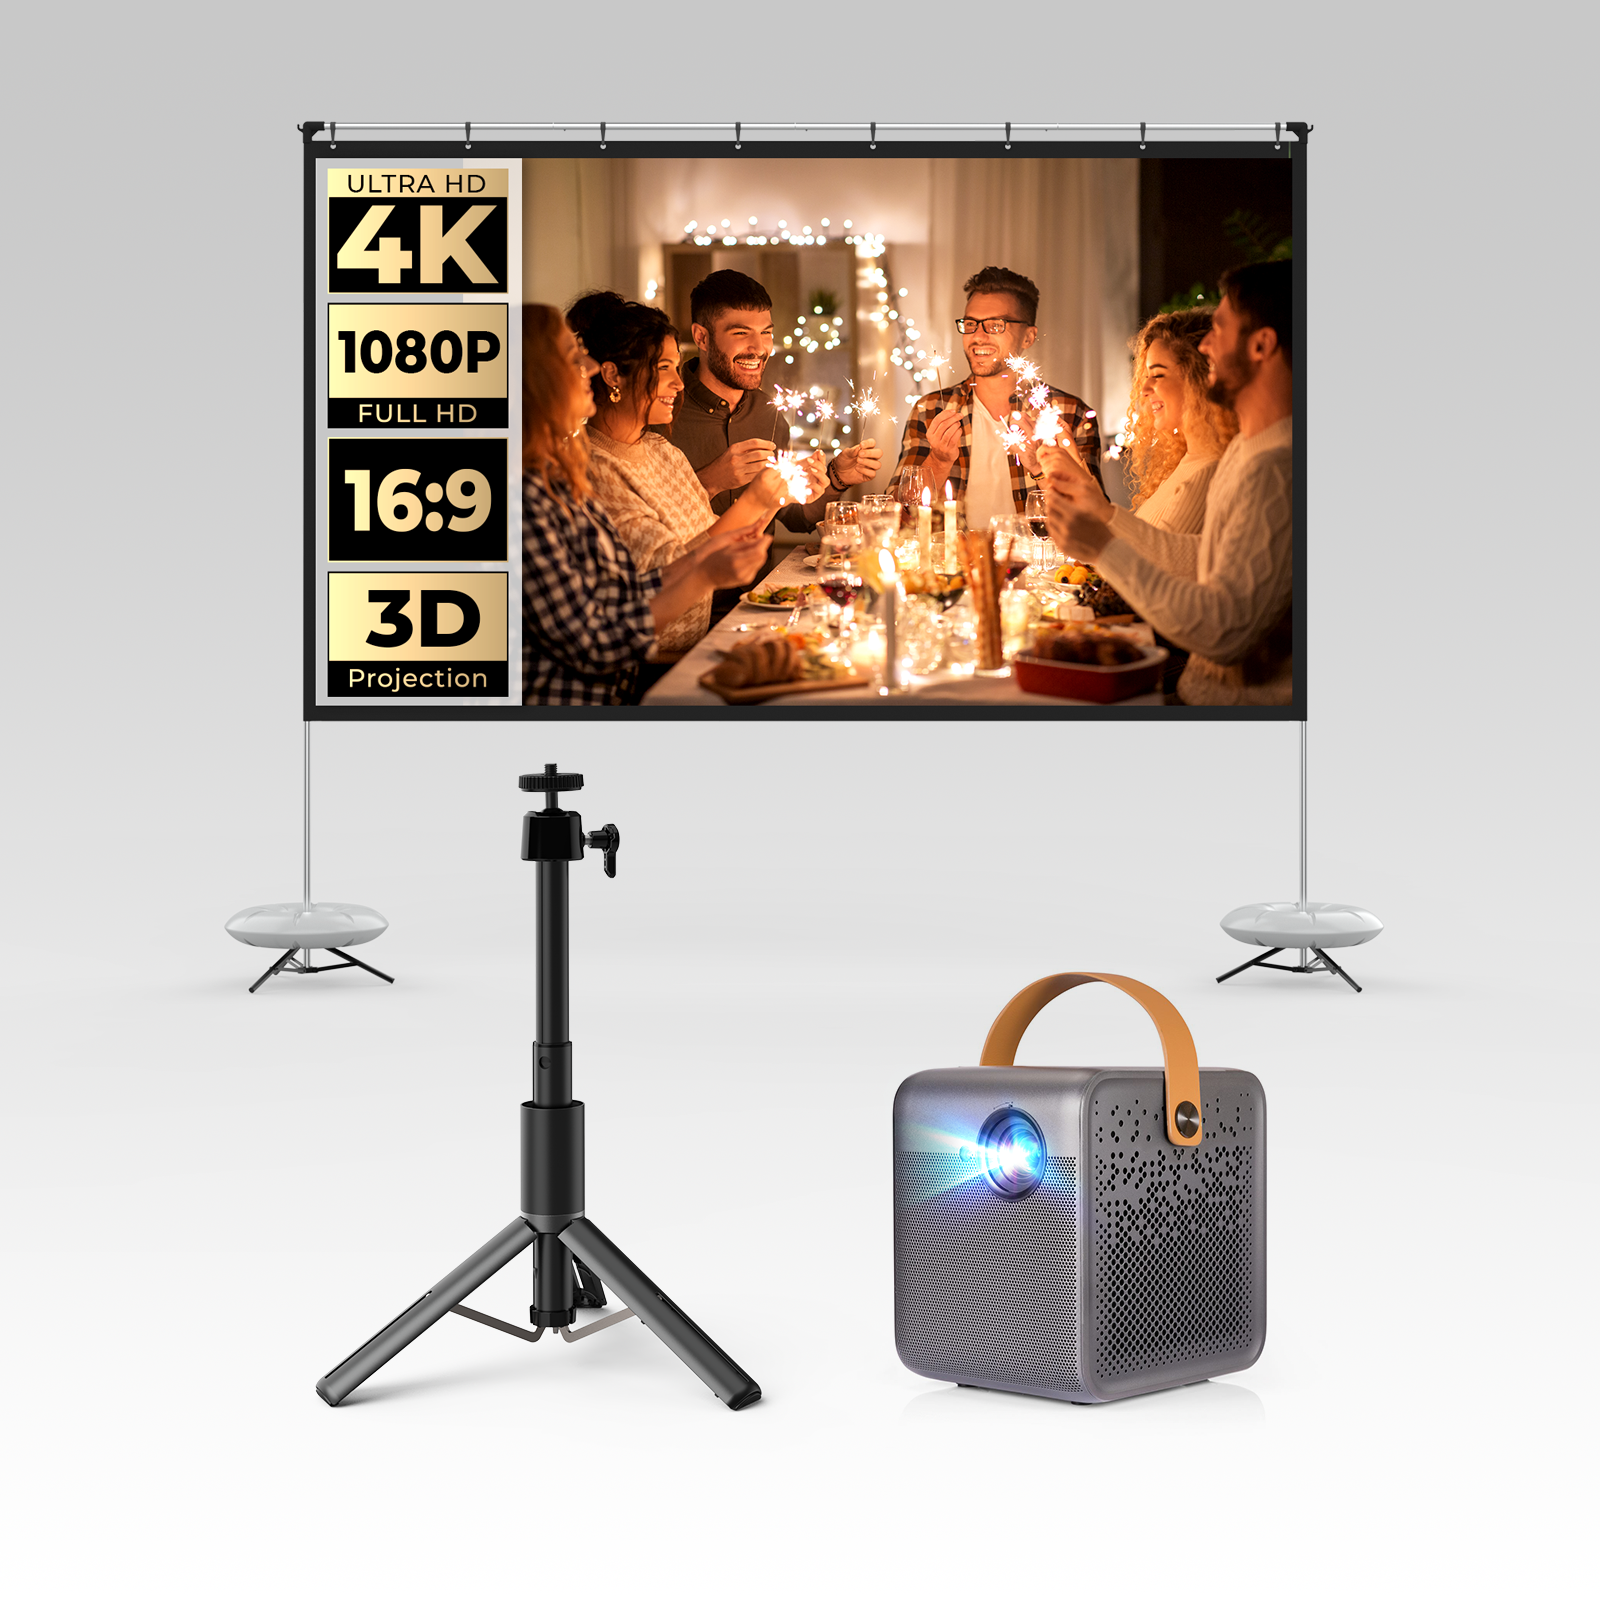 Pocket mini projector SMART WiFi with 4K resolution + LED + Android 9.0 up  to 120 diagonal